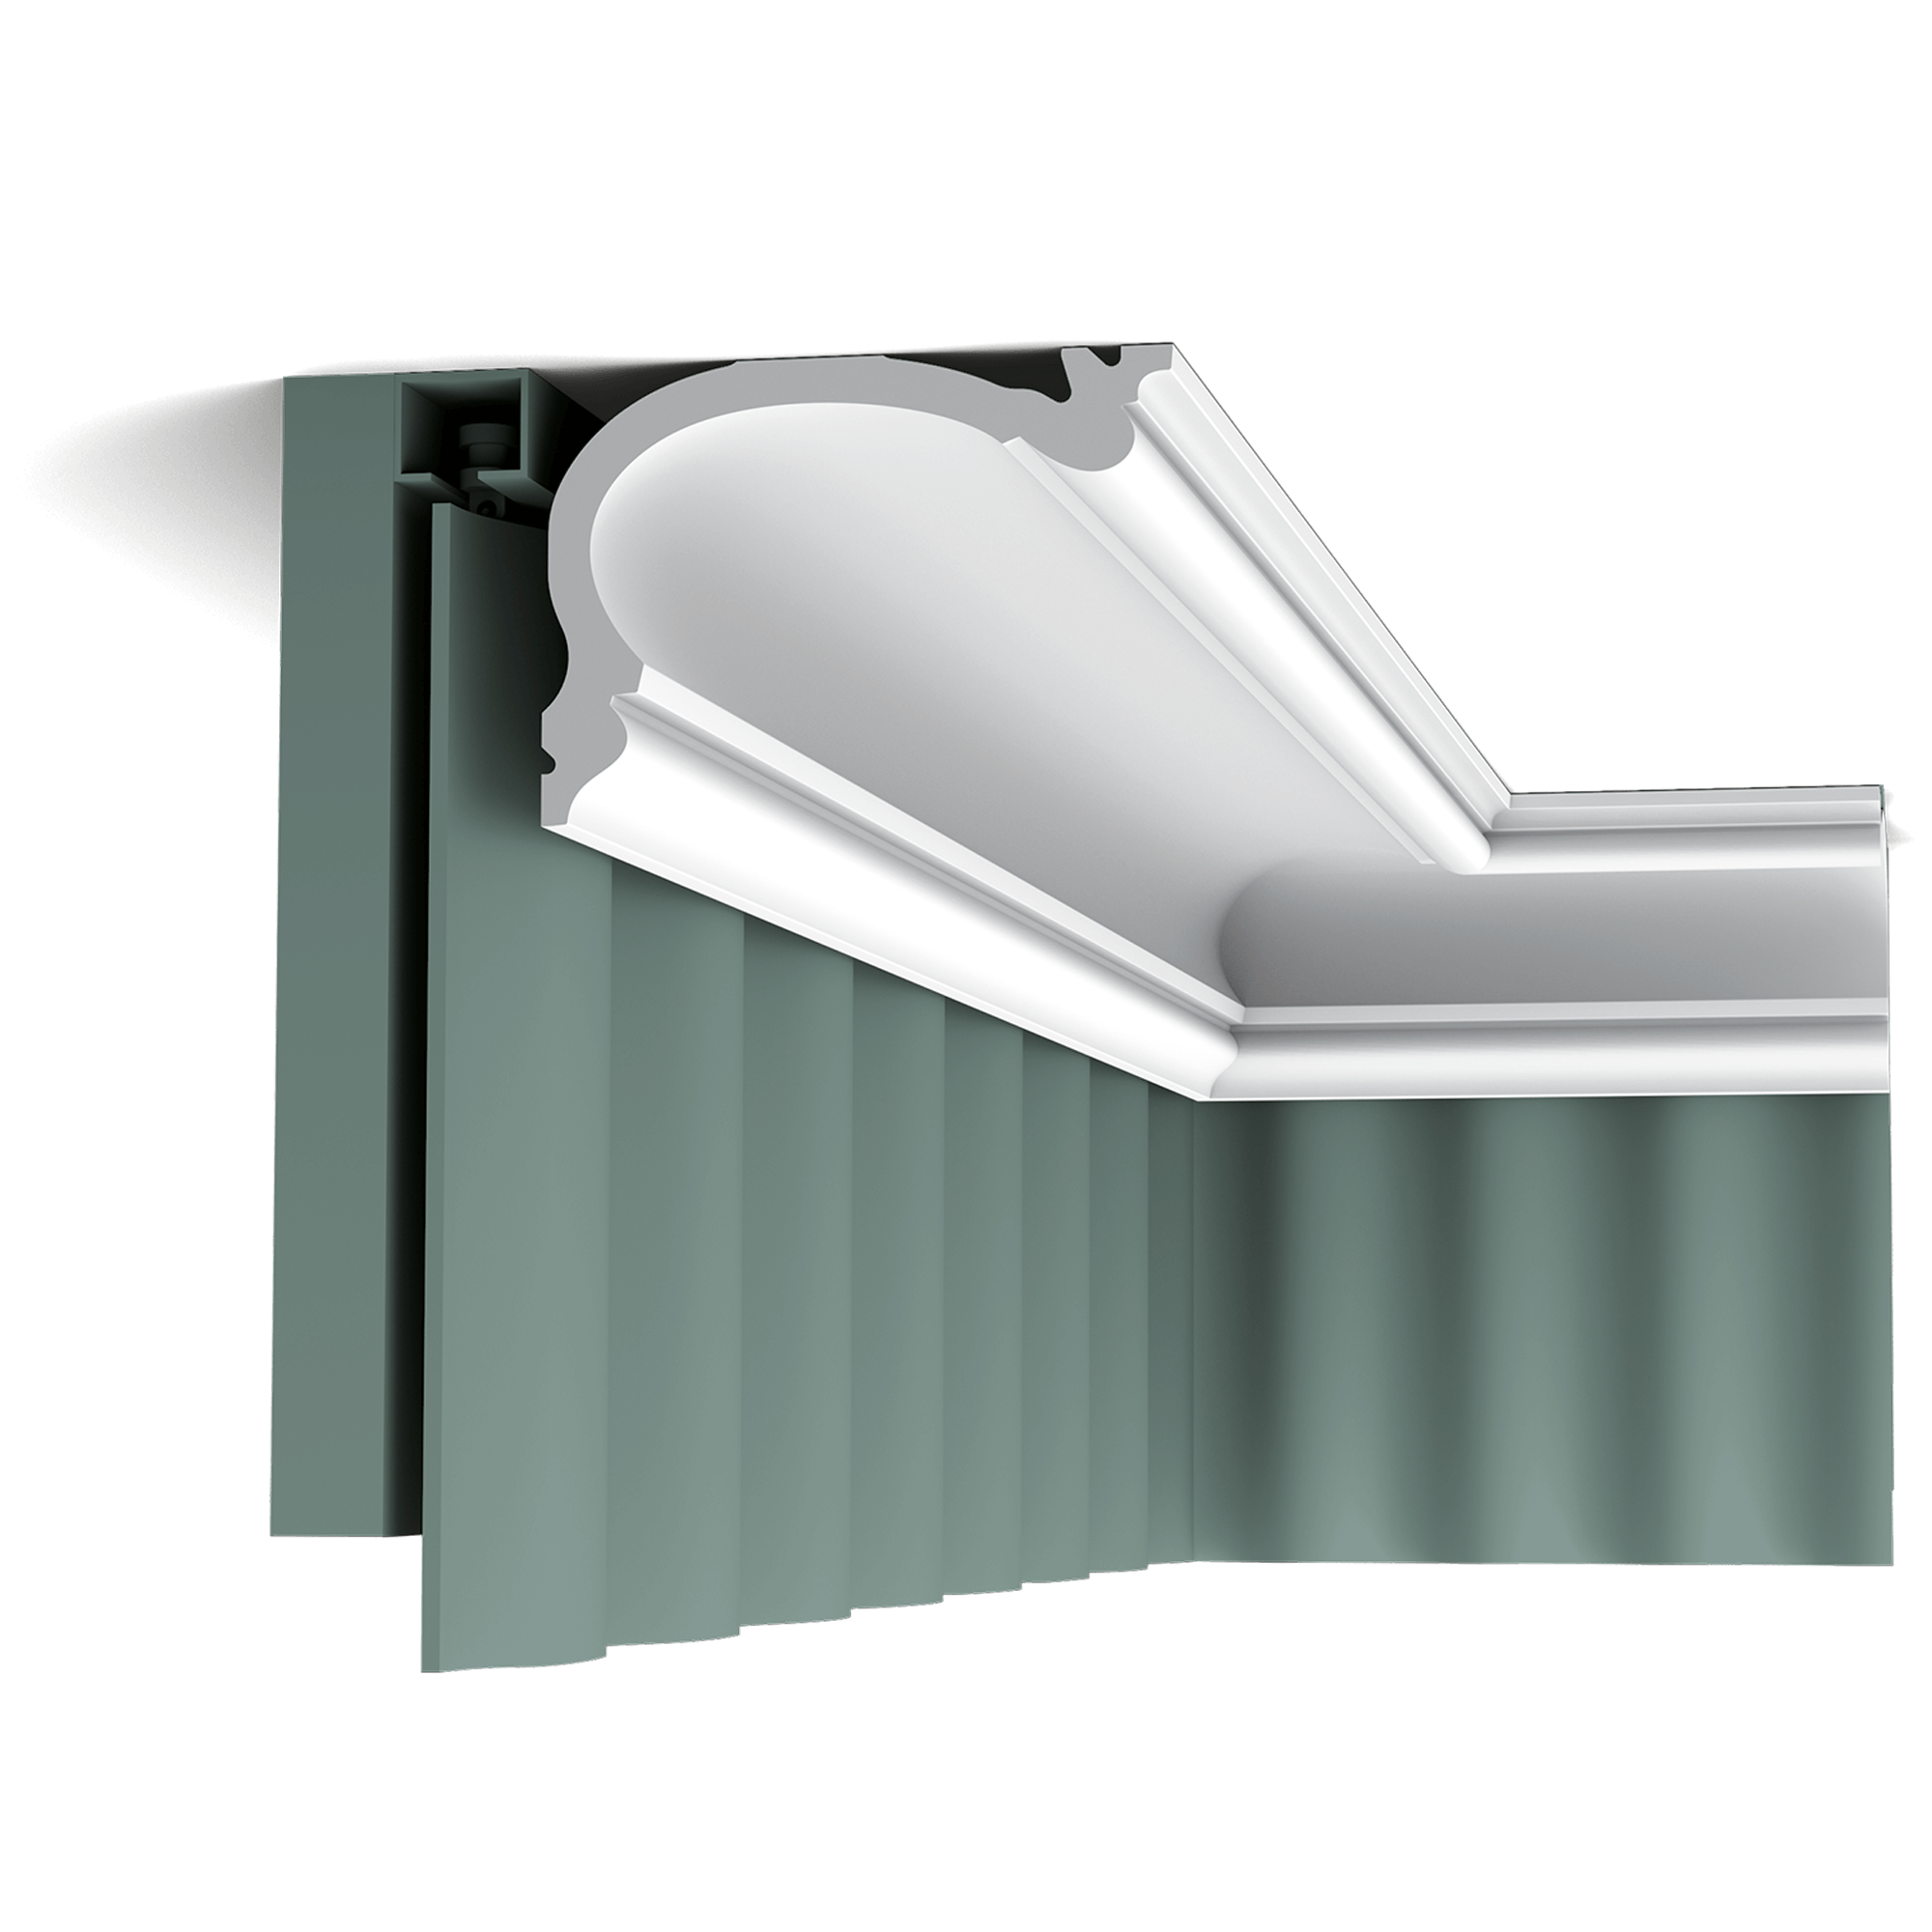 c341 curtain profile 60f1 This classic cornice moulding has an additional glueing board so it can also be used as a curtain pelmet. This nicely conceals the curtain fixtures for a neat finish.